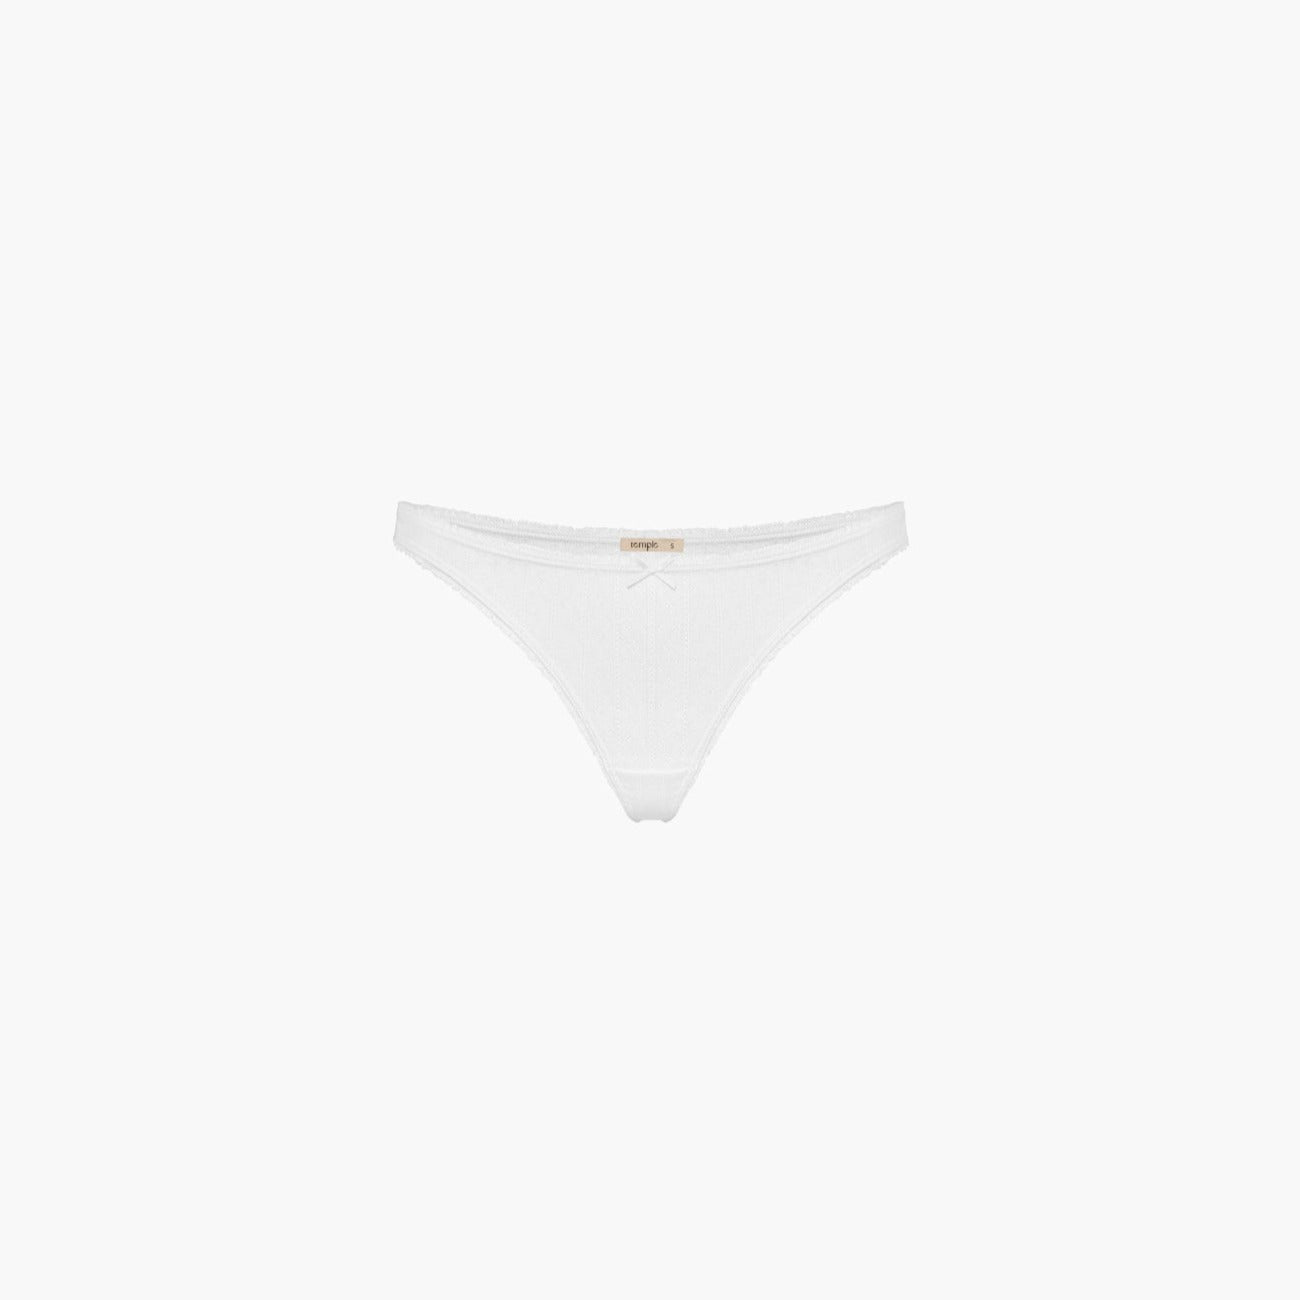 Most Loved, 100% Organic Cotton Pointelle Lingerie